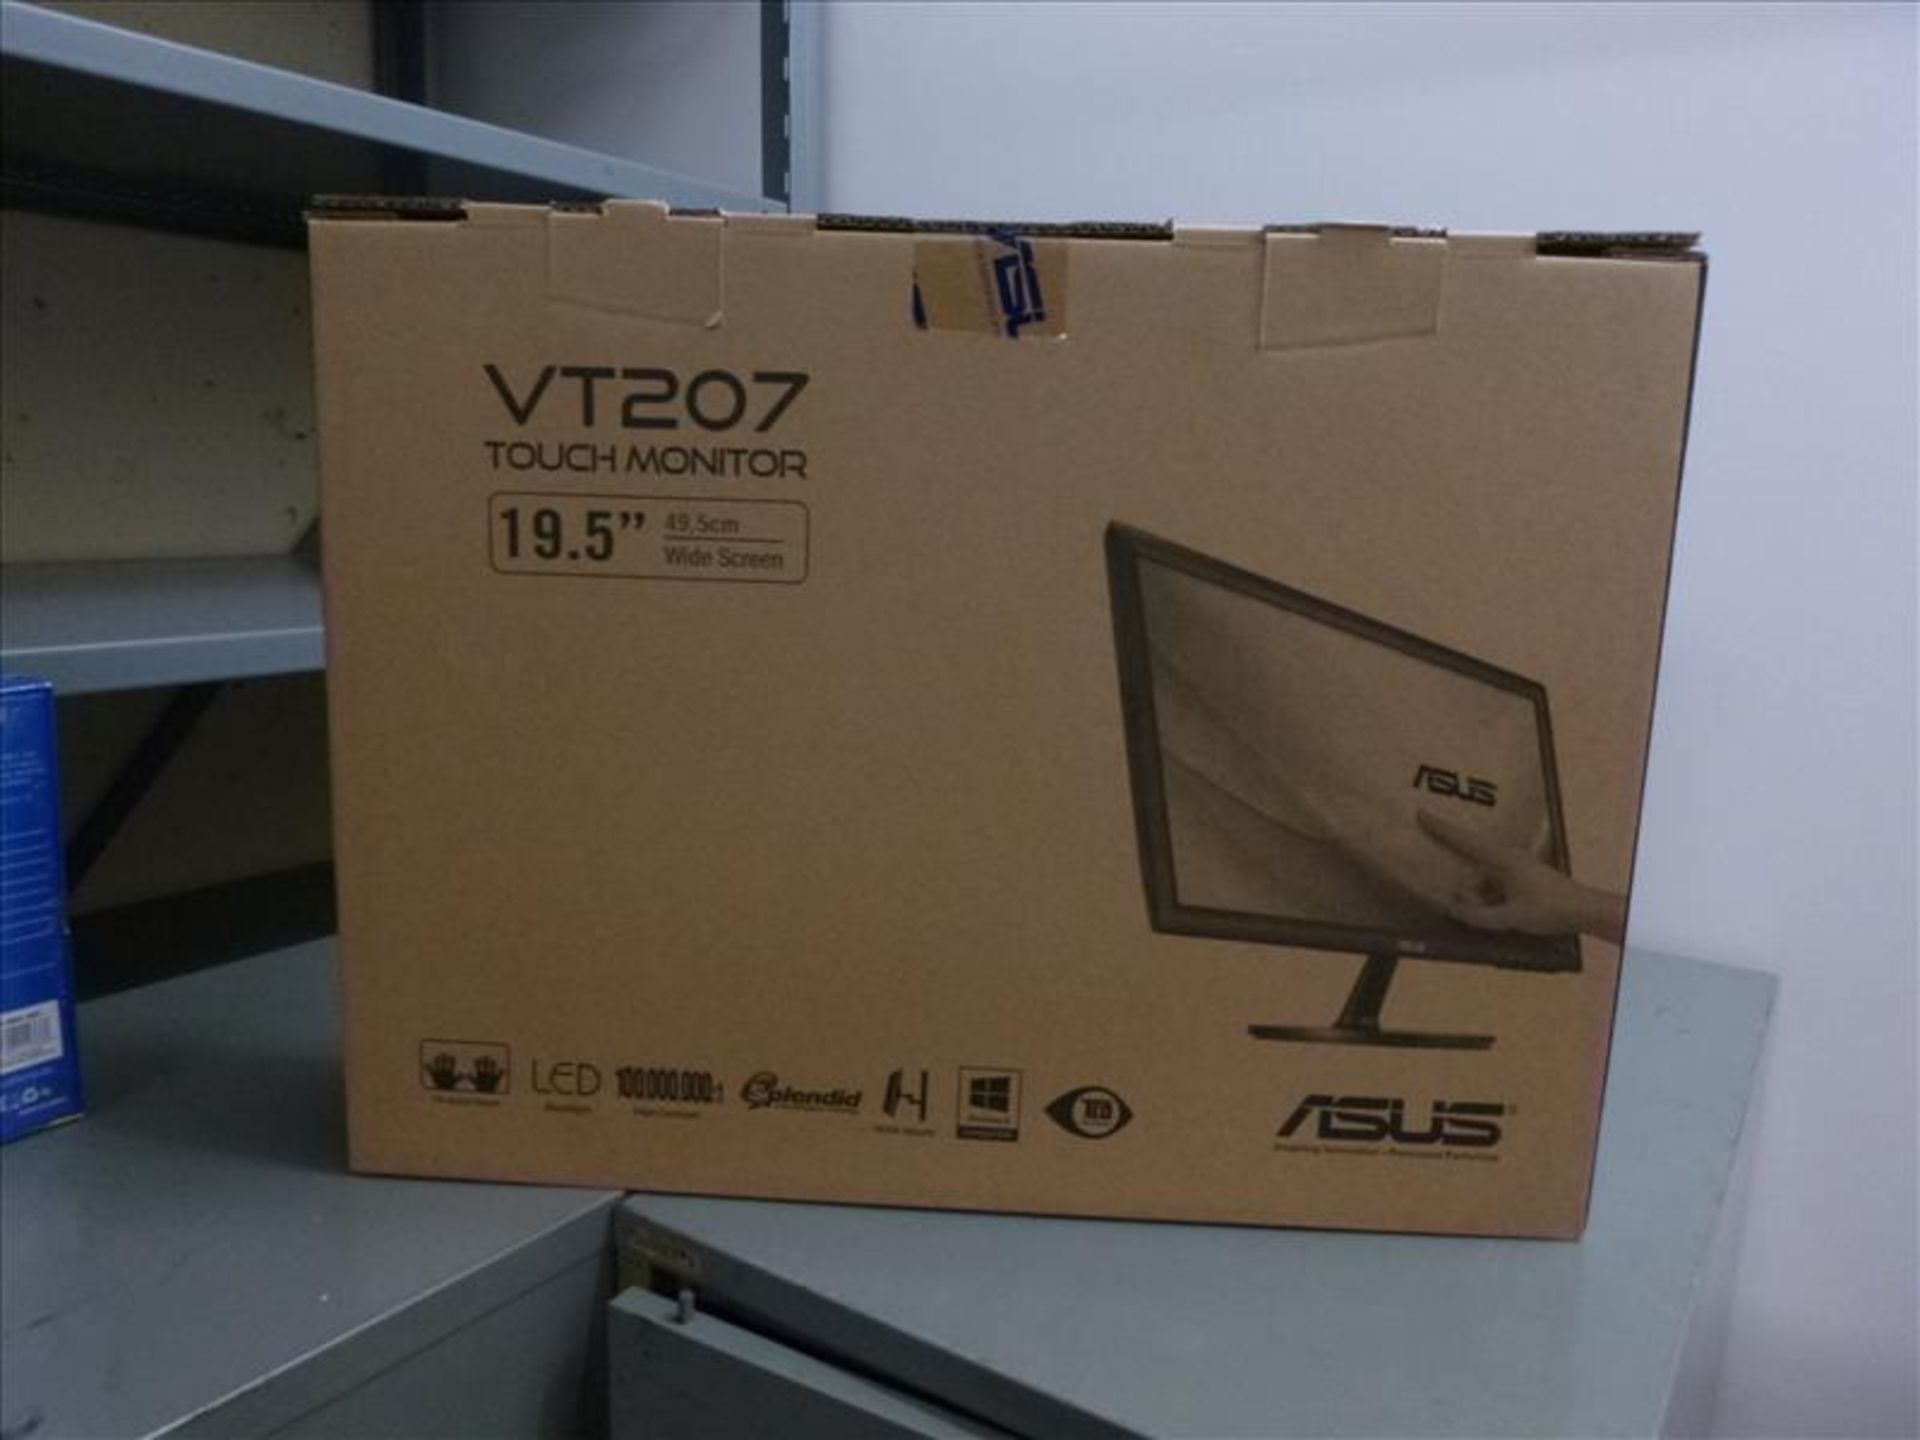 (4) Asus VT207 19.5" LED touch screen monitor, wide screen, 1600 x 900 HD+ (NEW) [B]